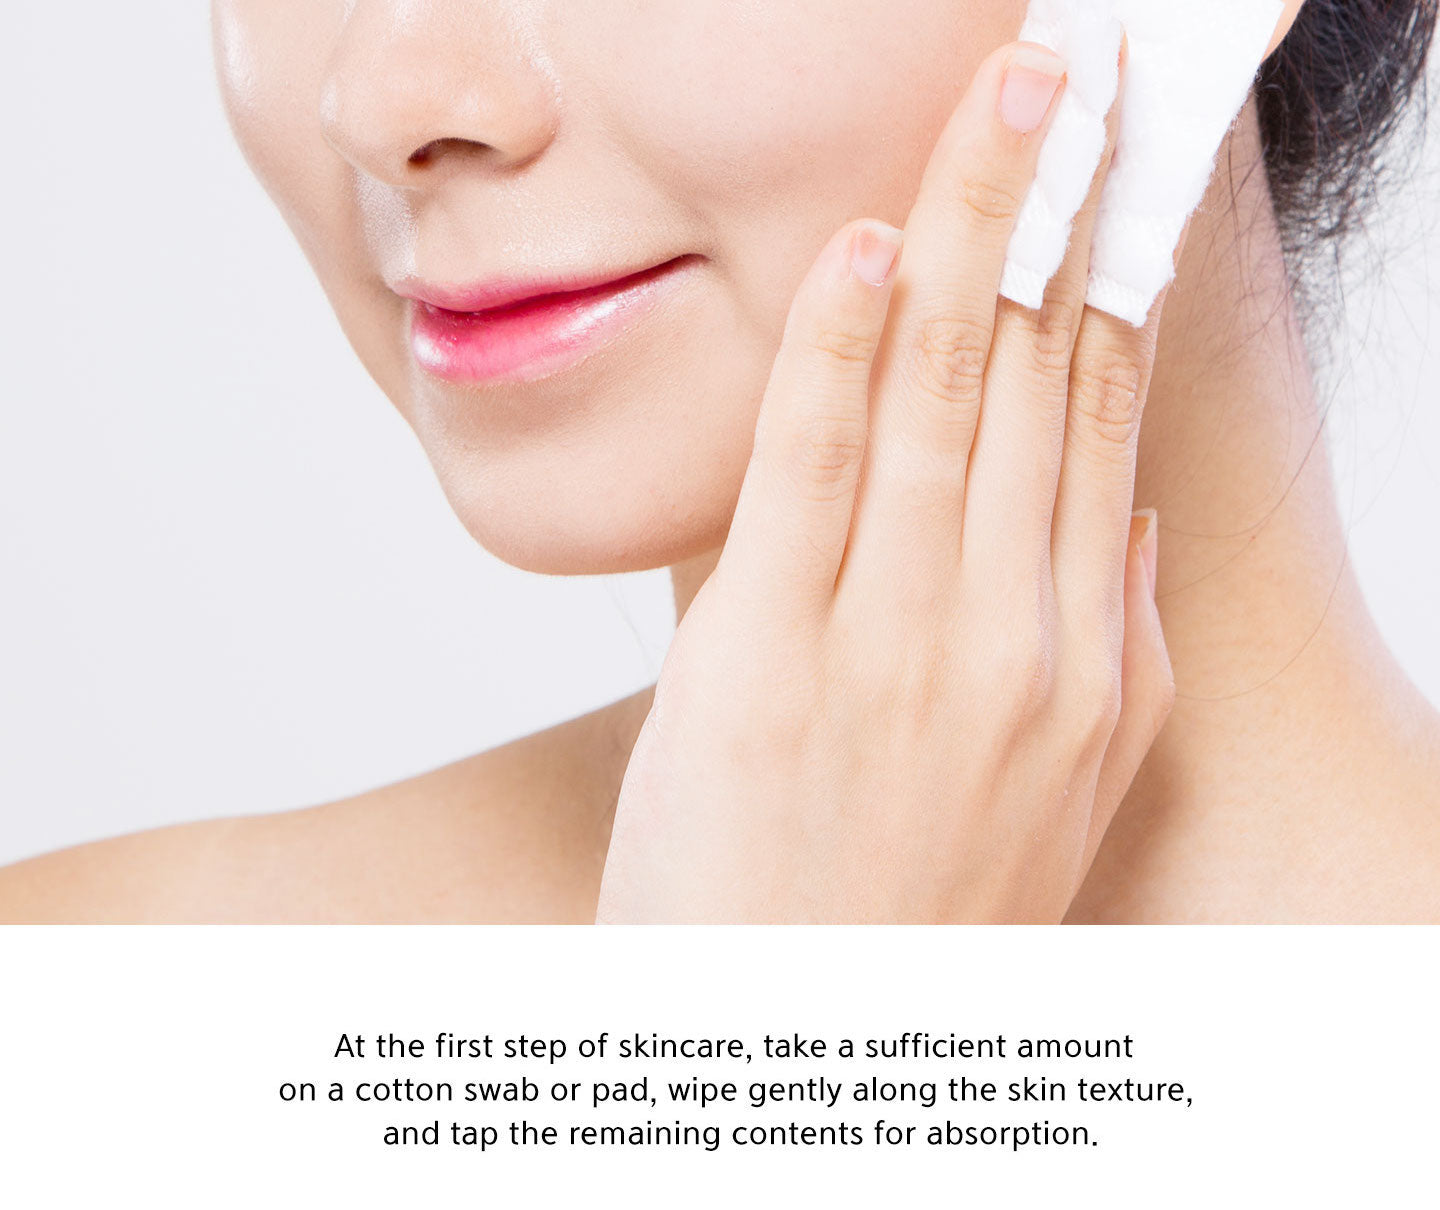 At the first step of skincare, take a sufficient amount on a cotton swab or pad, wipe gently along the skin texture, and tap the remaining contents for absorption. 